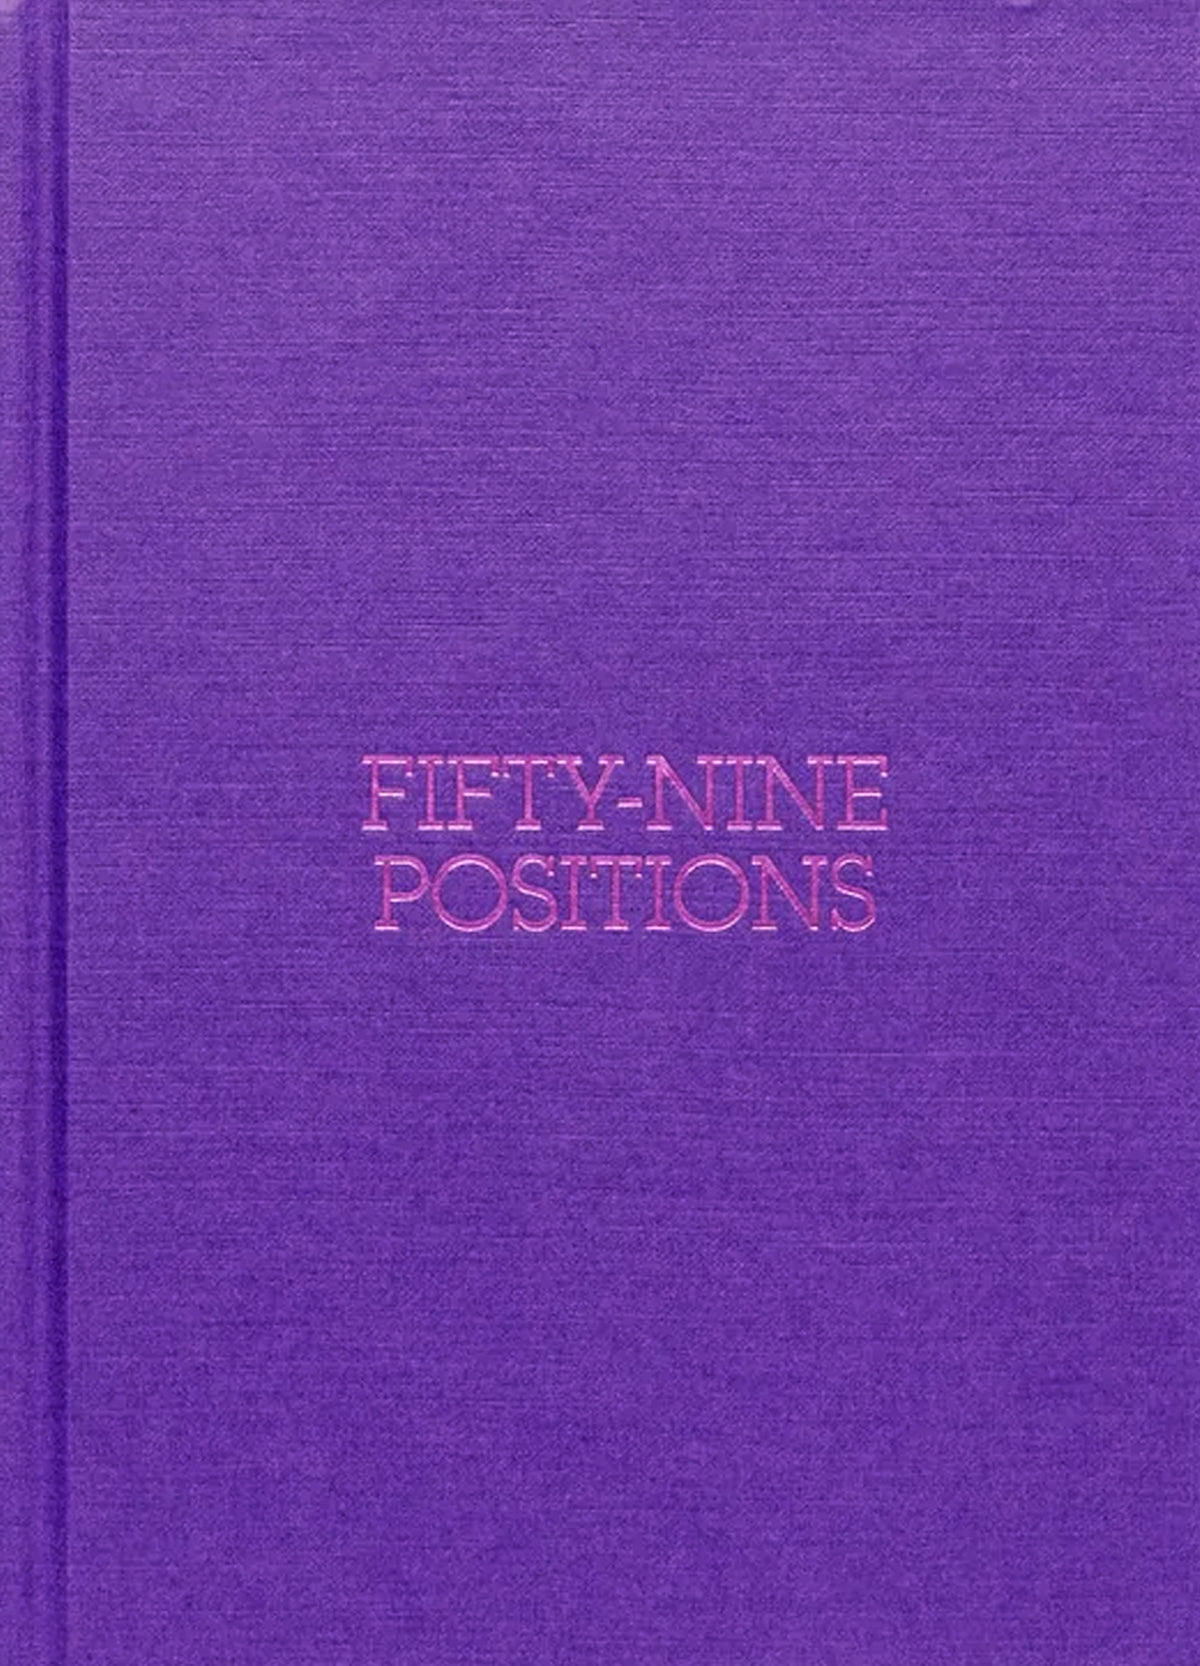 Fifty-Nine Positions